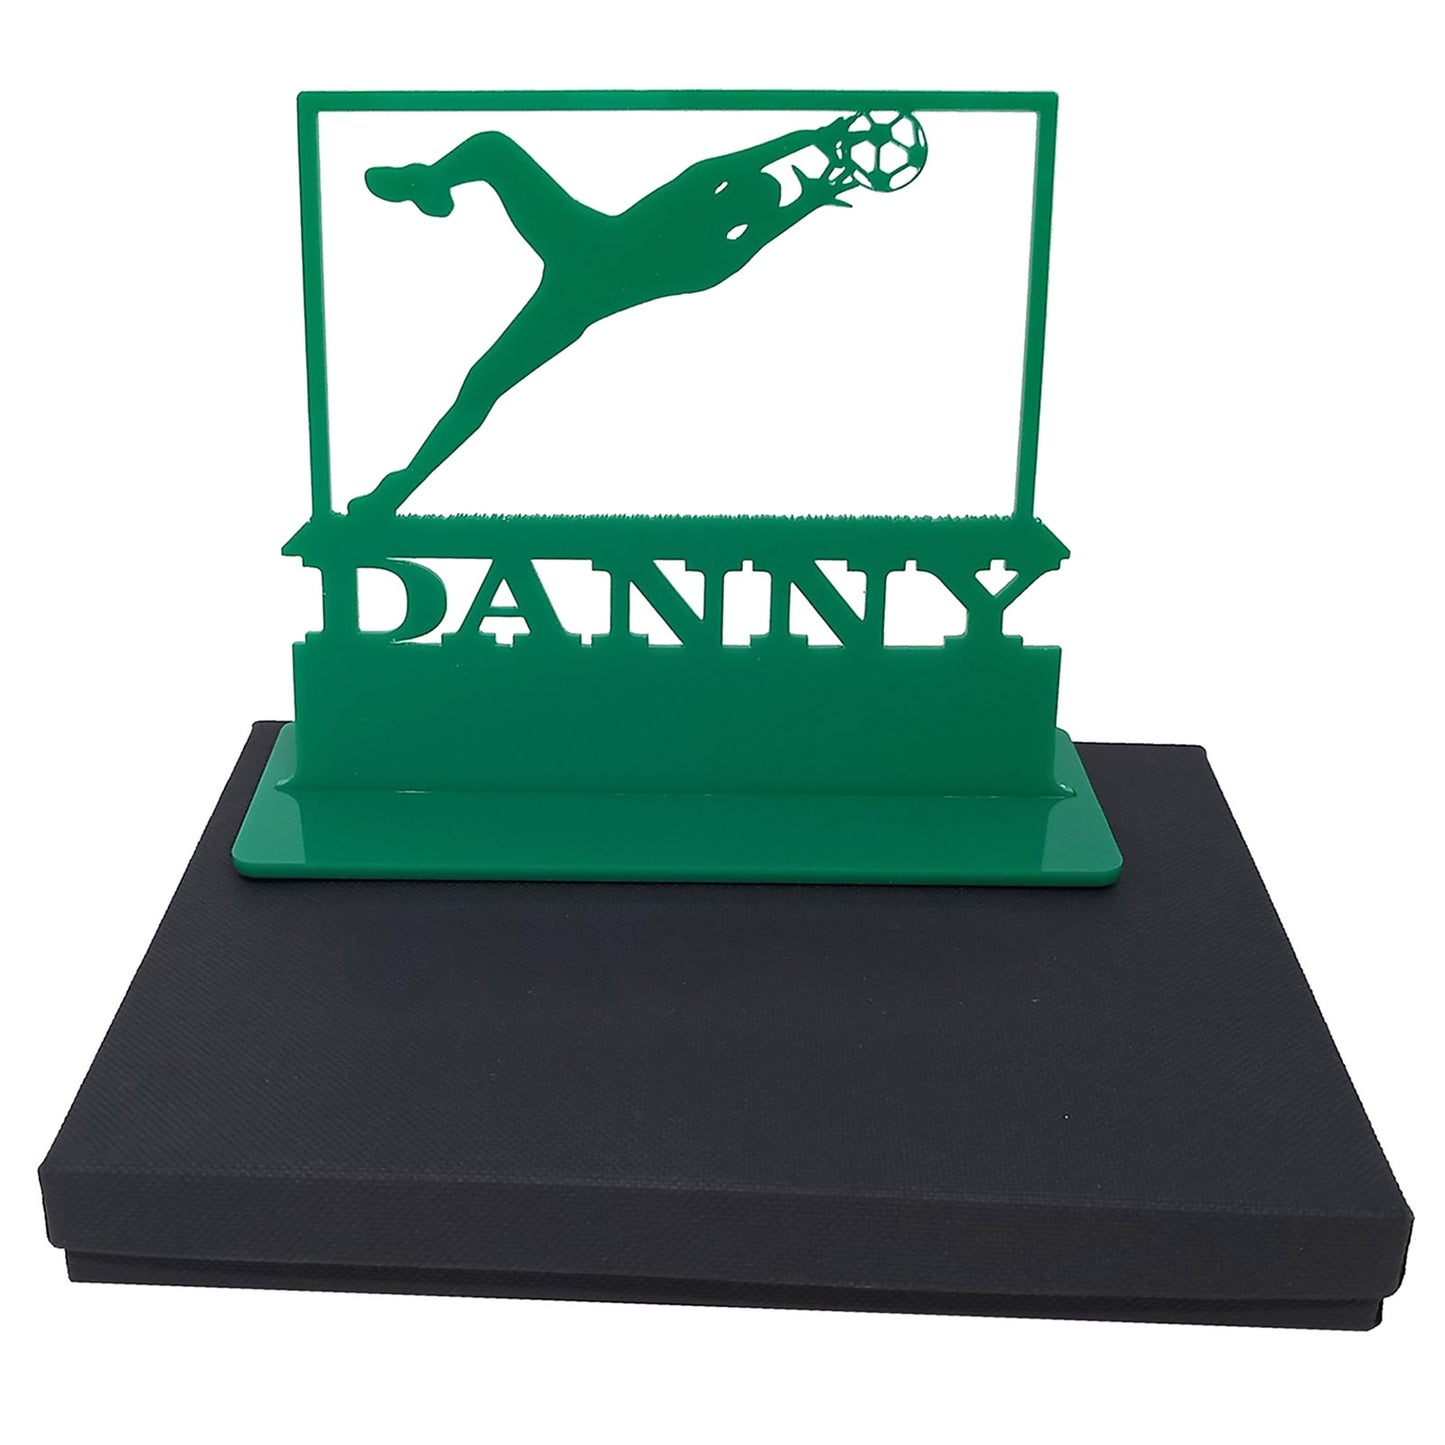 Personalised unique acrylic football goalkeeper gifts. This standalone present is a keepsake ornament plaque.